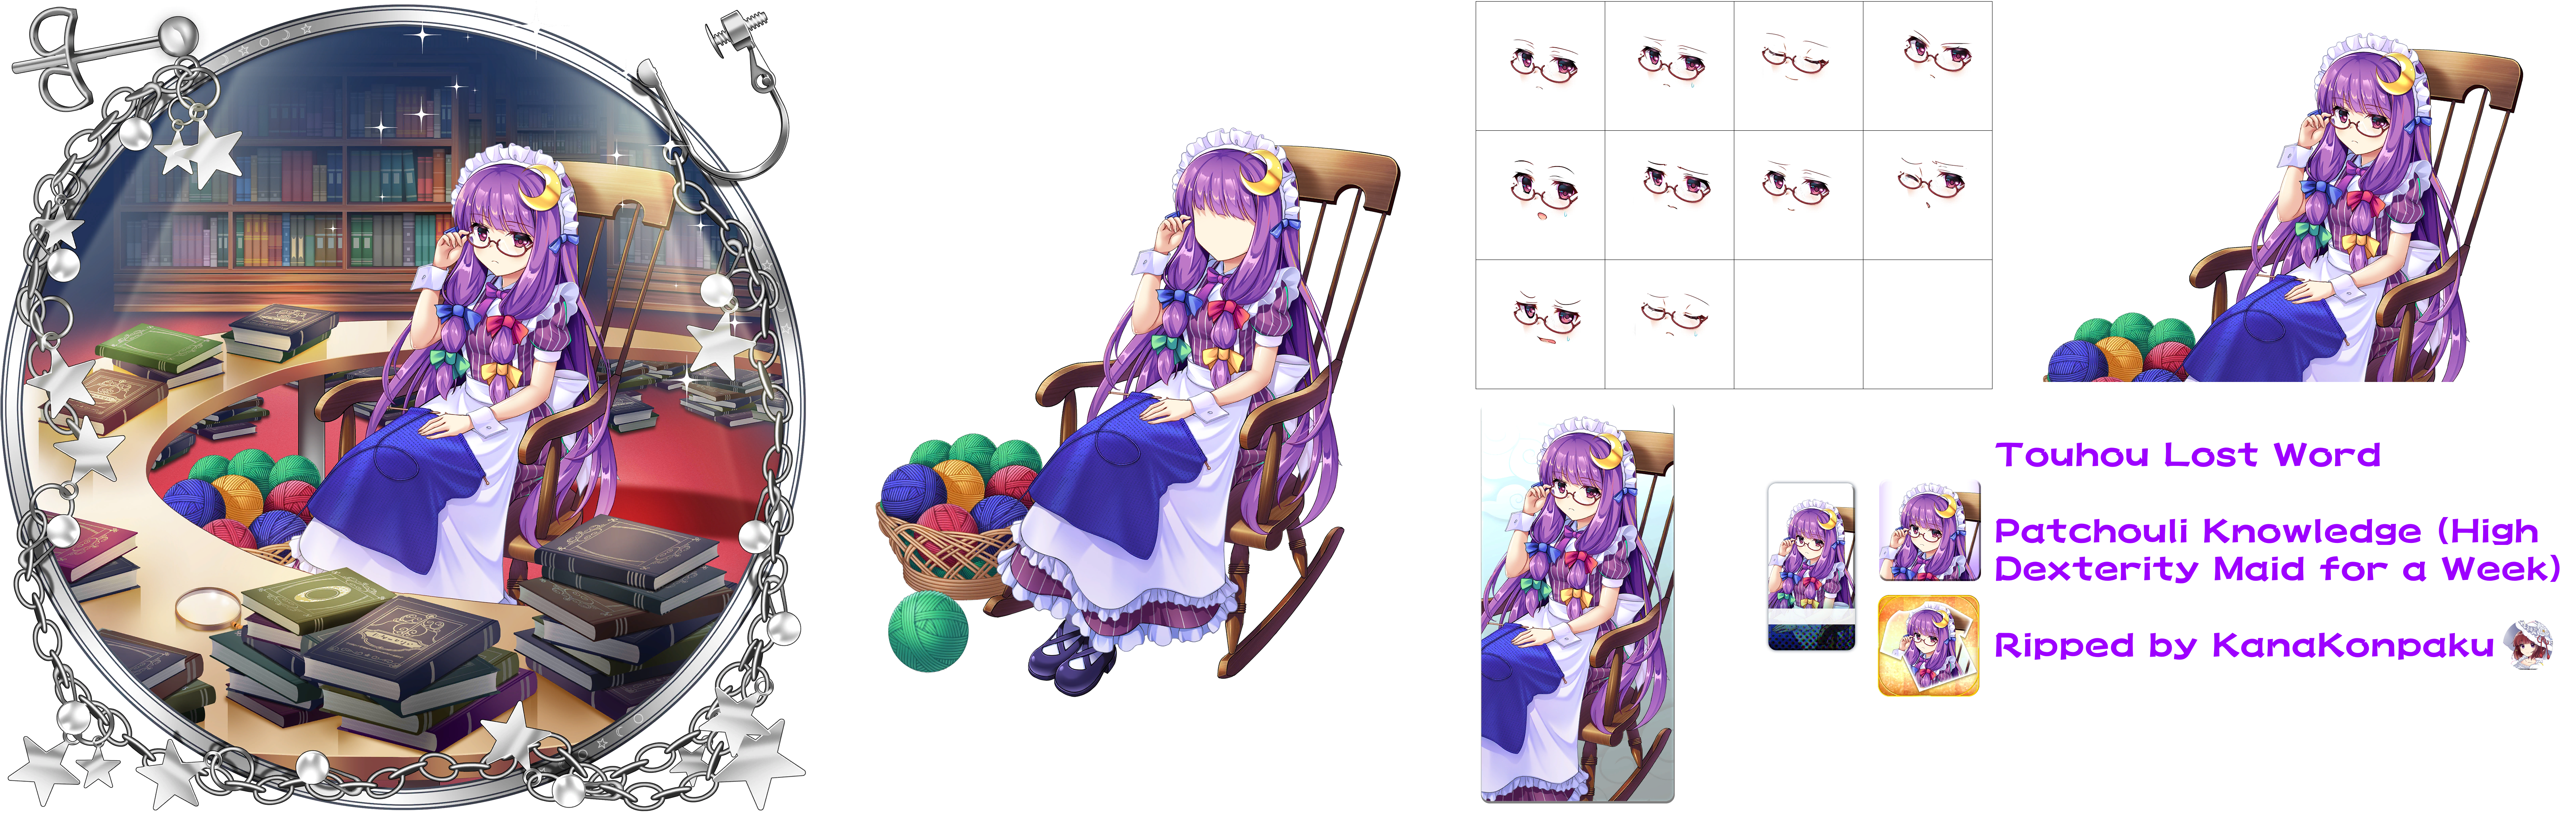 Touhou LostWord - Patchouli Knowledge (High Dexterity Maid for a Week)